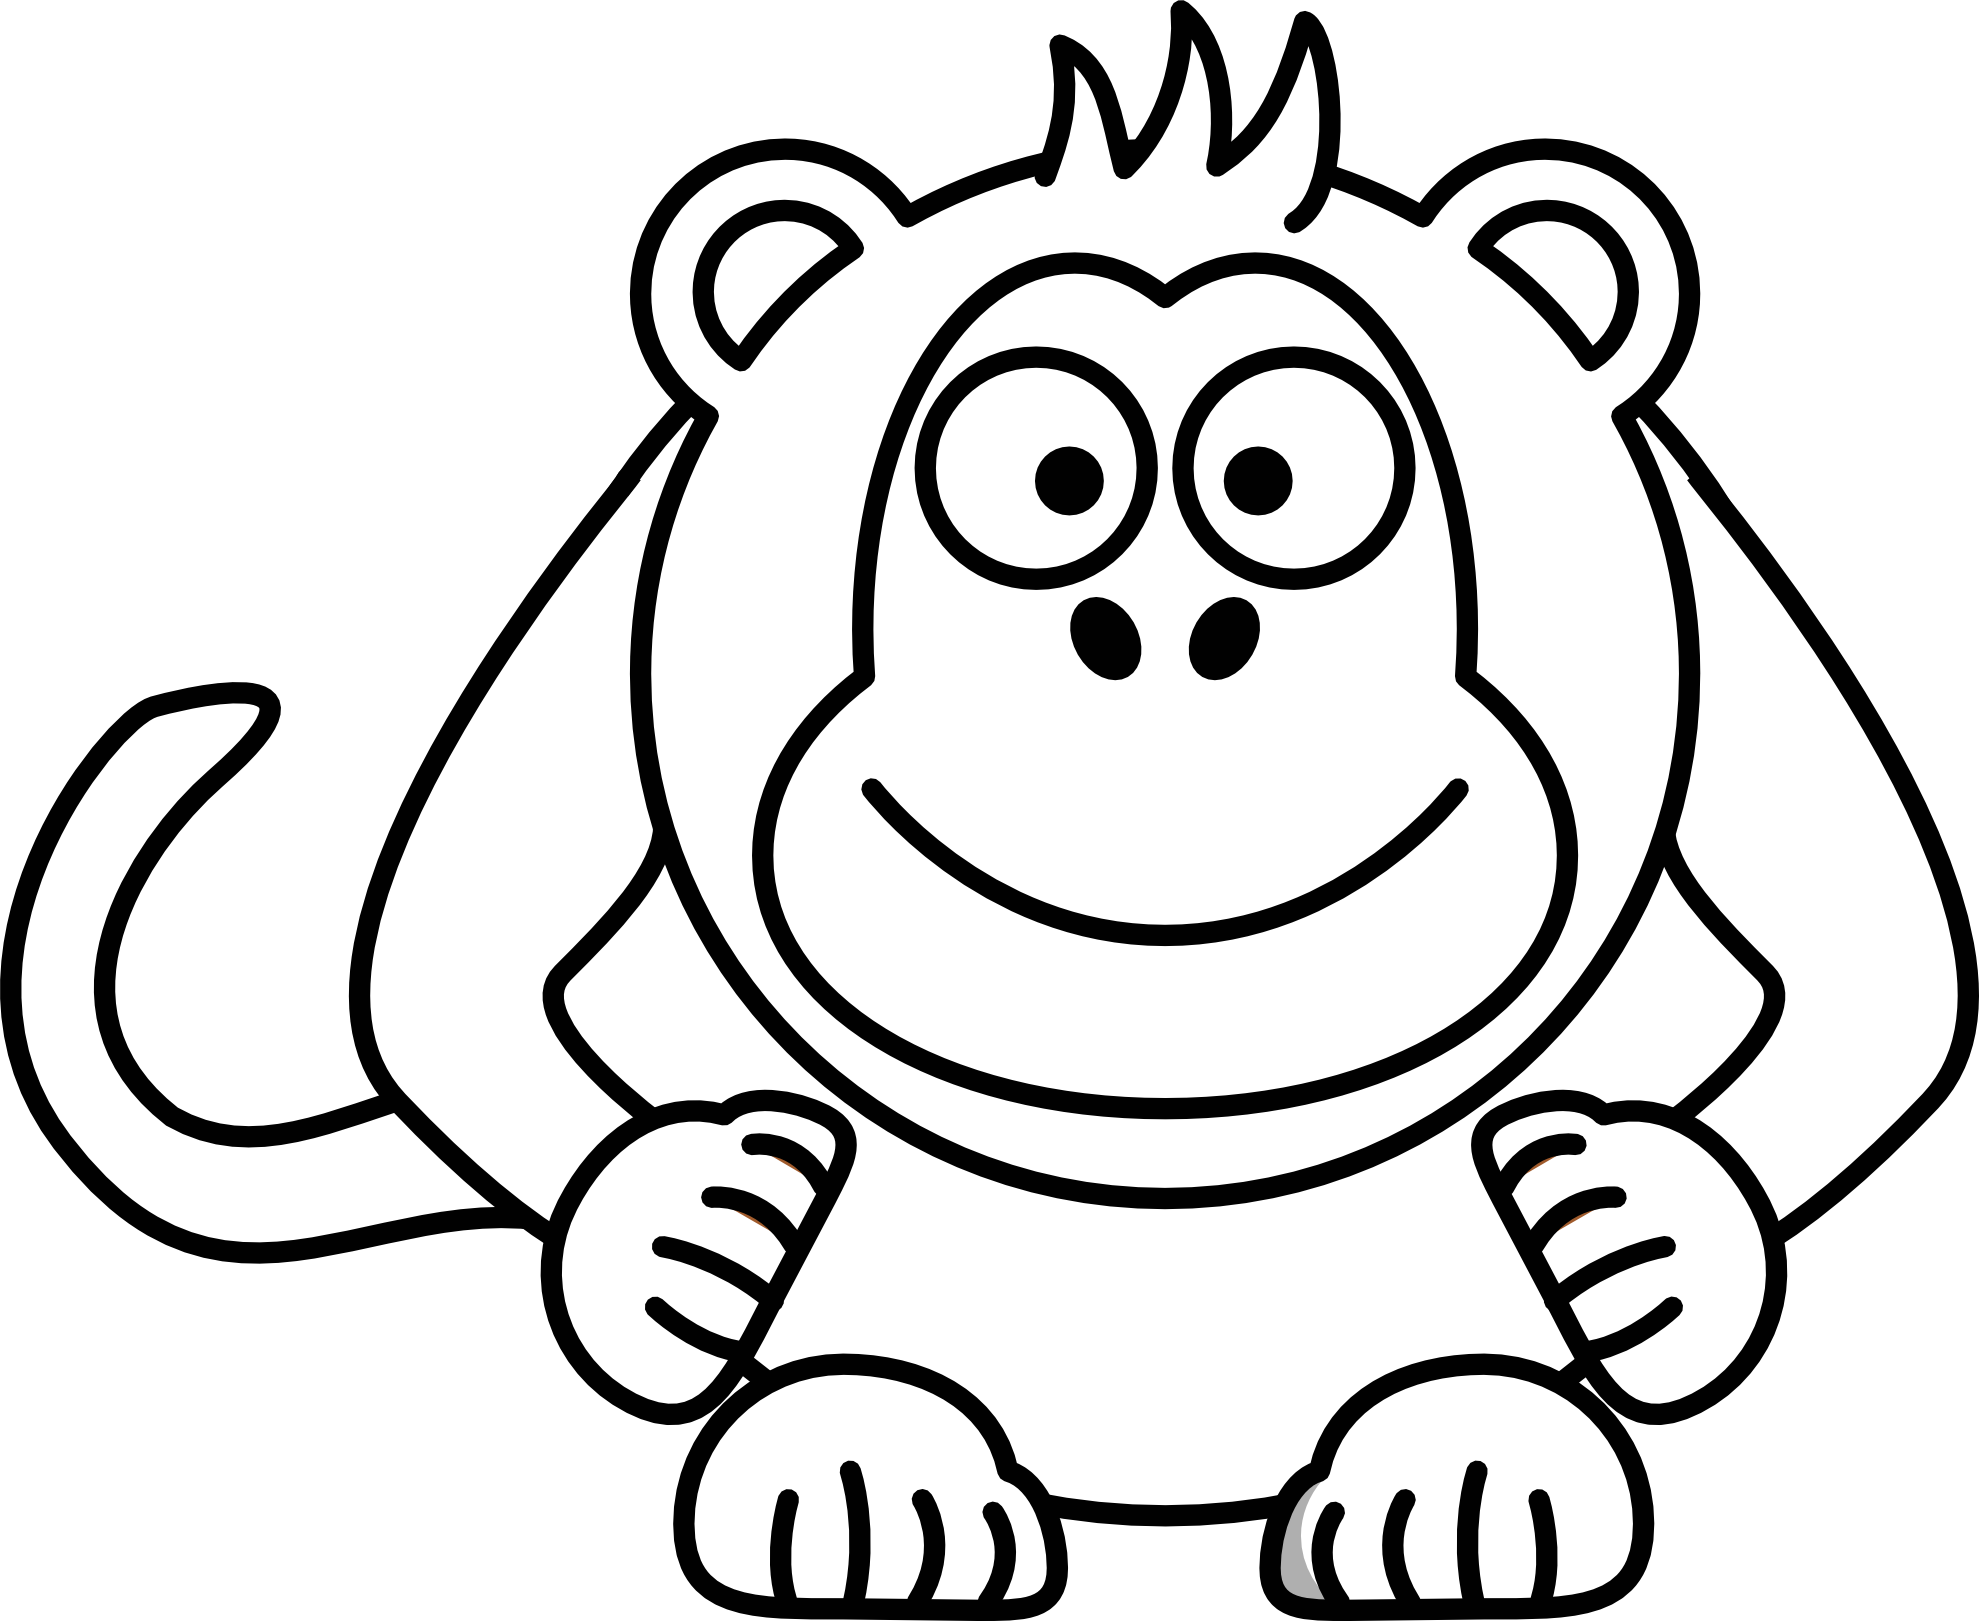 Monkey Drawing Cartoon Images & Pictures - Becuo